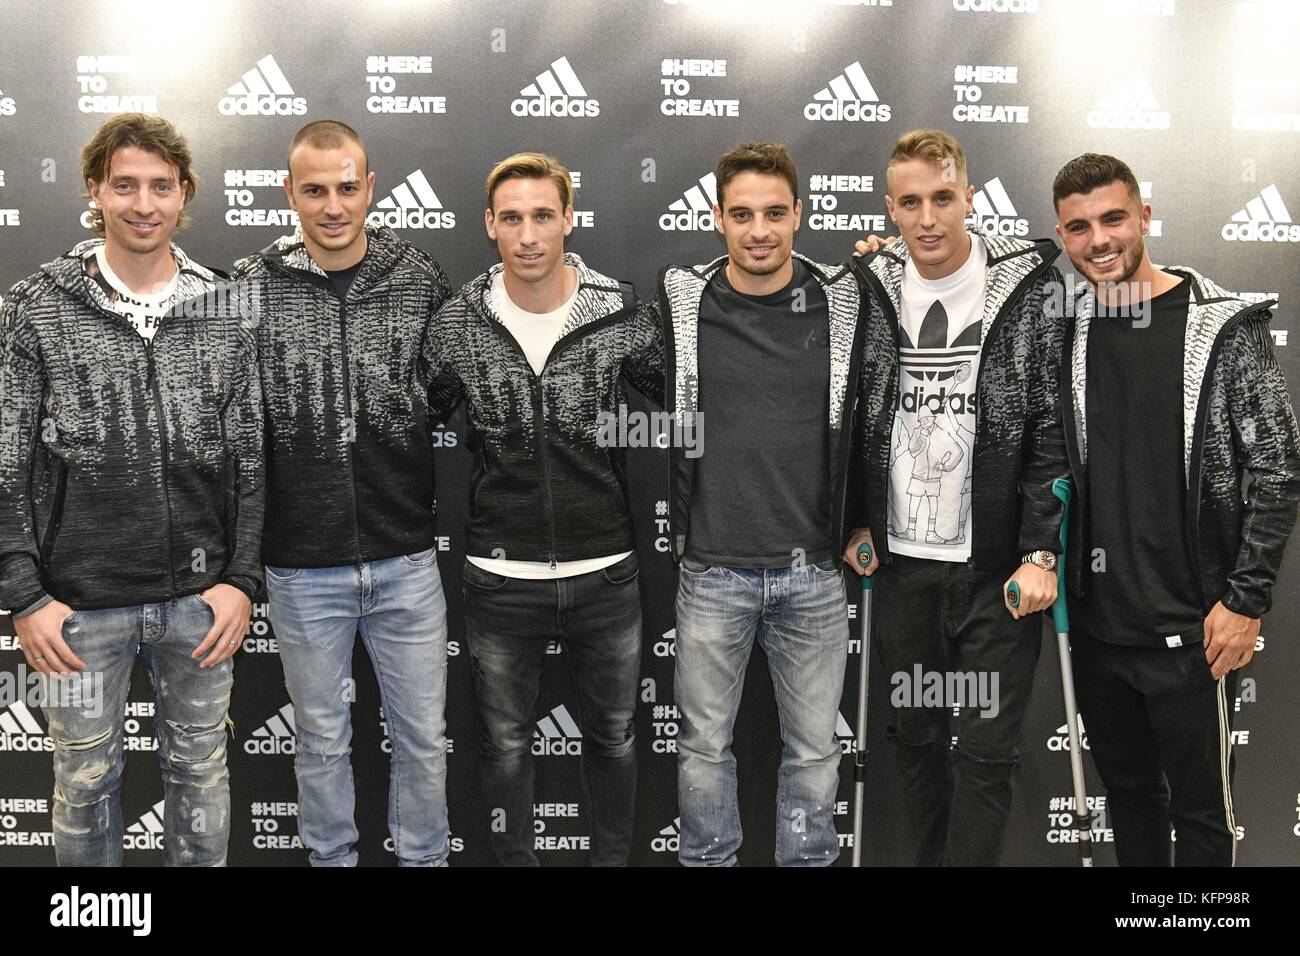 David Beckham opens the largest Adidas store in Italy Featuring: Riccardo  Montolivo, Lucas Belli, Giacomo Bonaventura, Andrea Conti, Patrick Cutrone  Where: Milan, ME, Italy When: 29 Sep 2017 Credit: IPA/WENN.com **Only  available